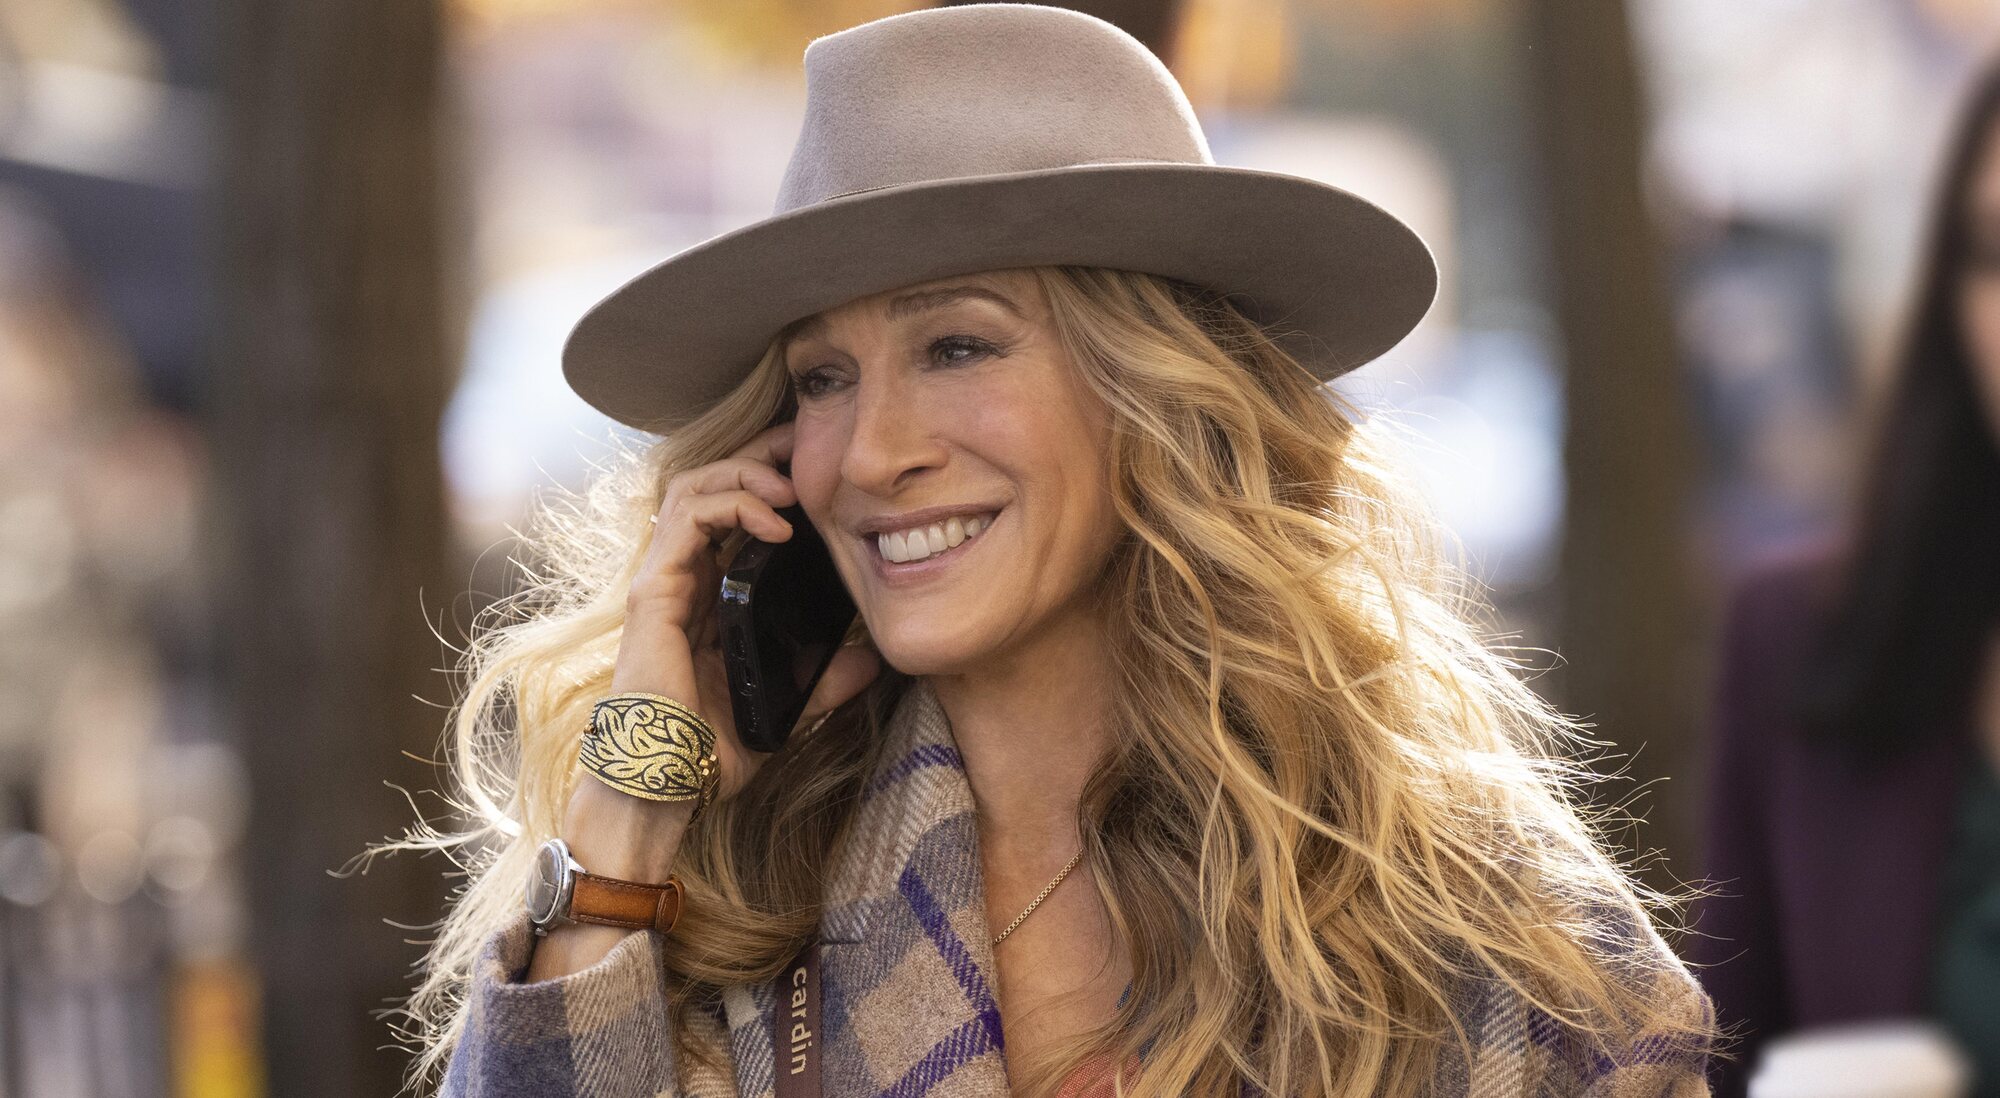 Sarah Jessica Parker en 'And Just Like That...'